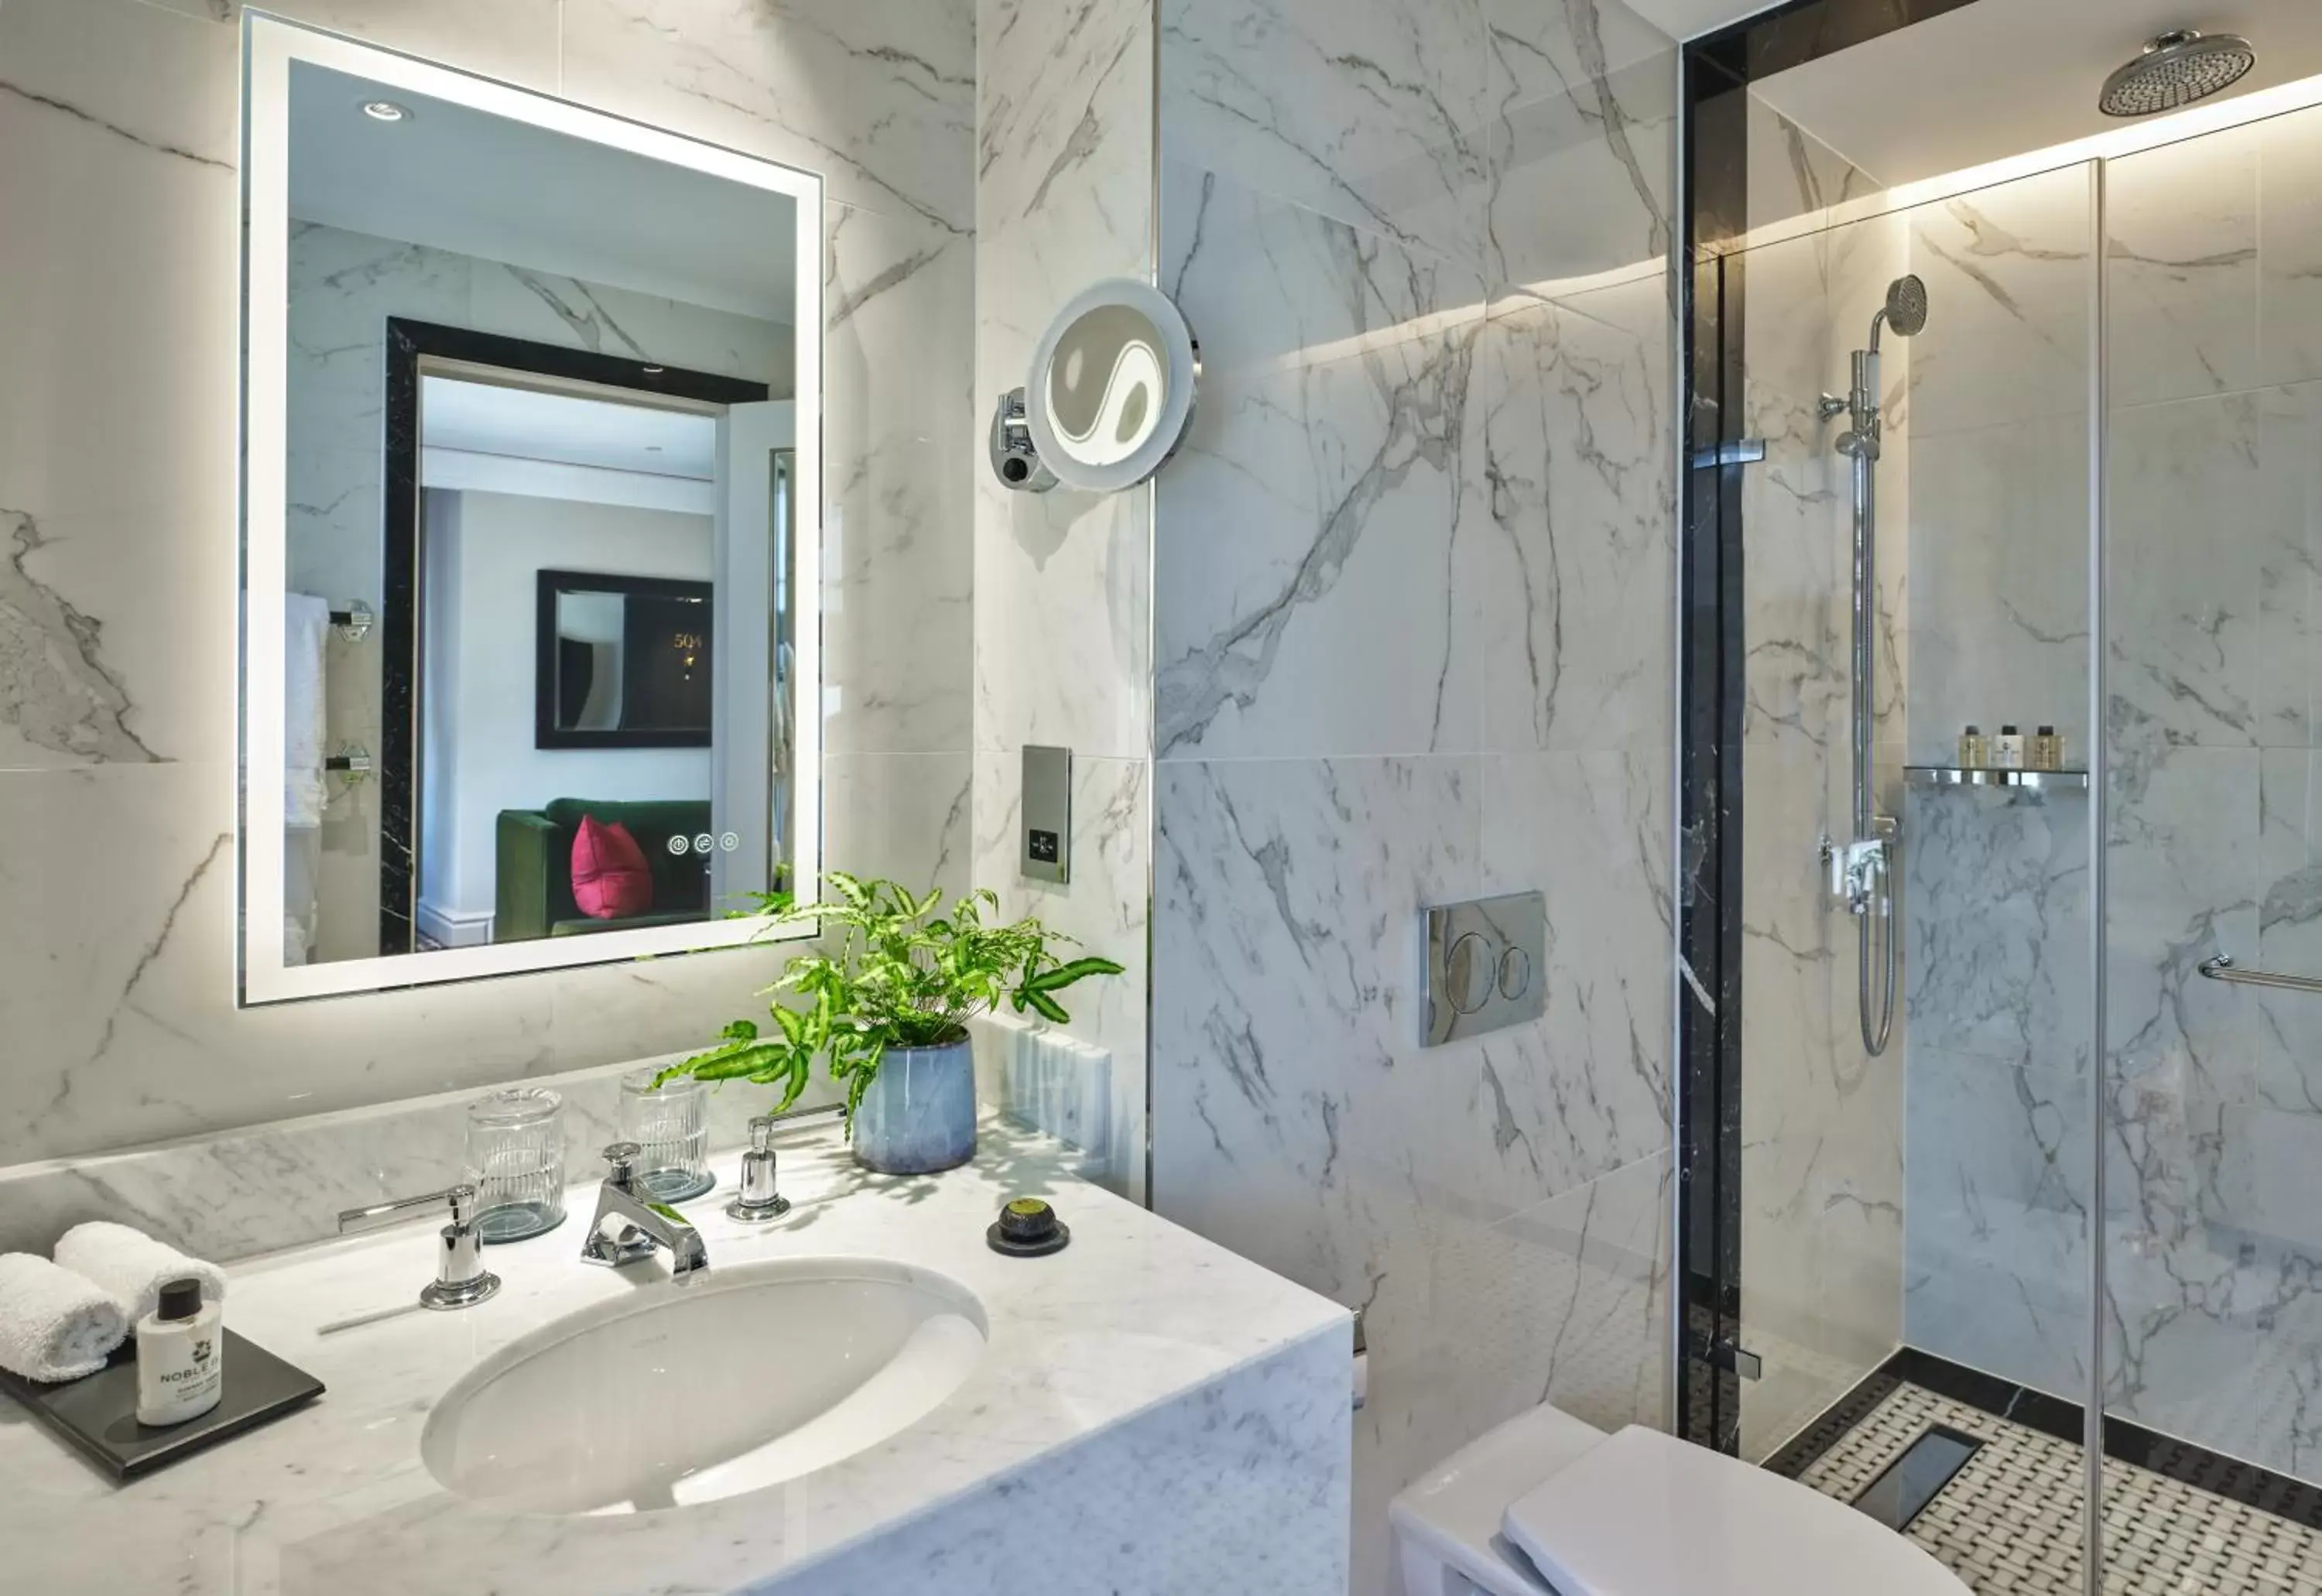 Bathroom in The Mayfair Townhouse - an Iconic Luxury Hotel